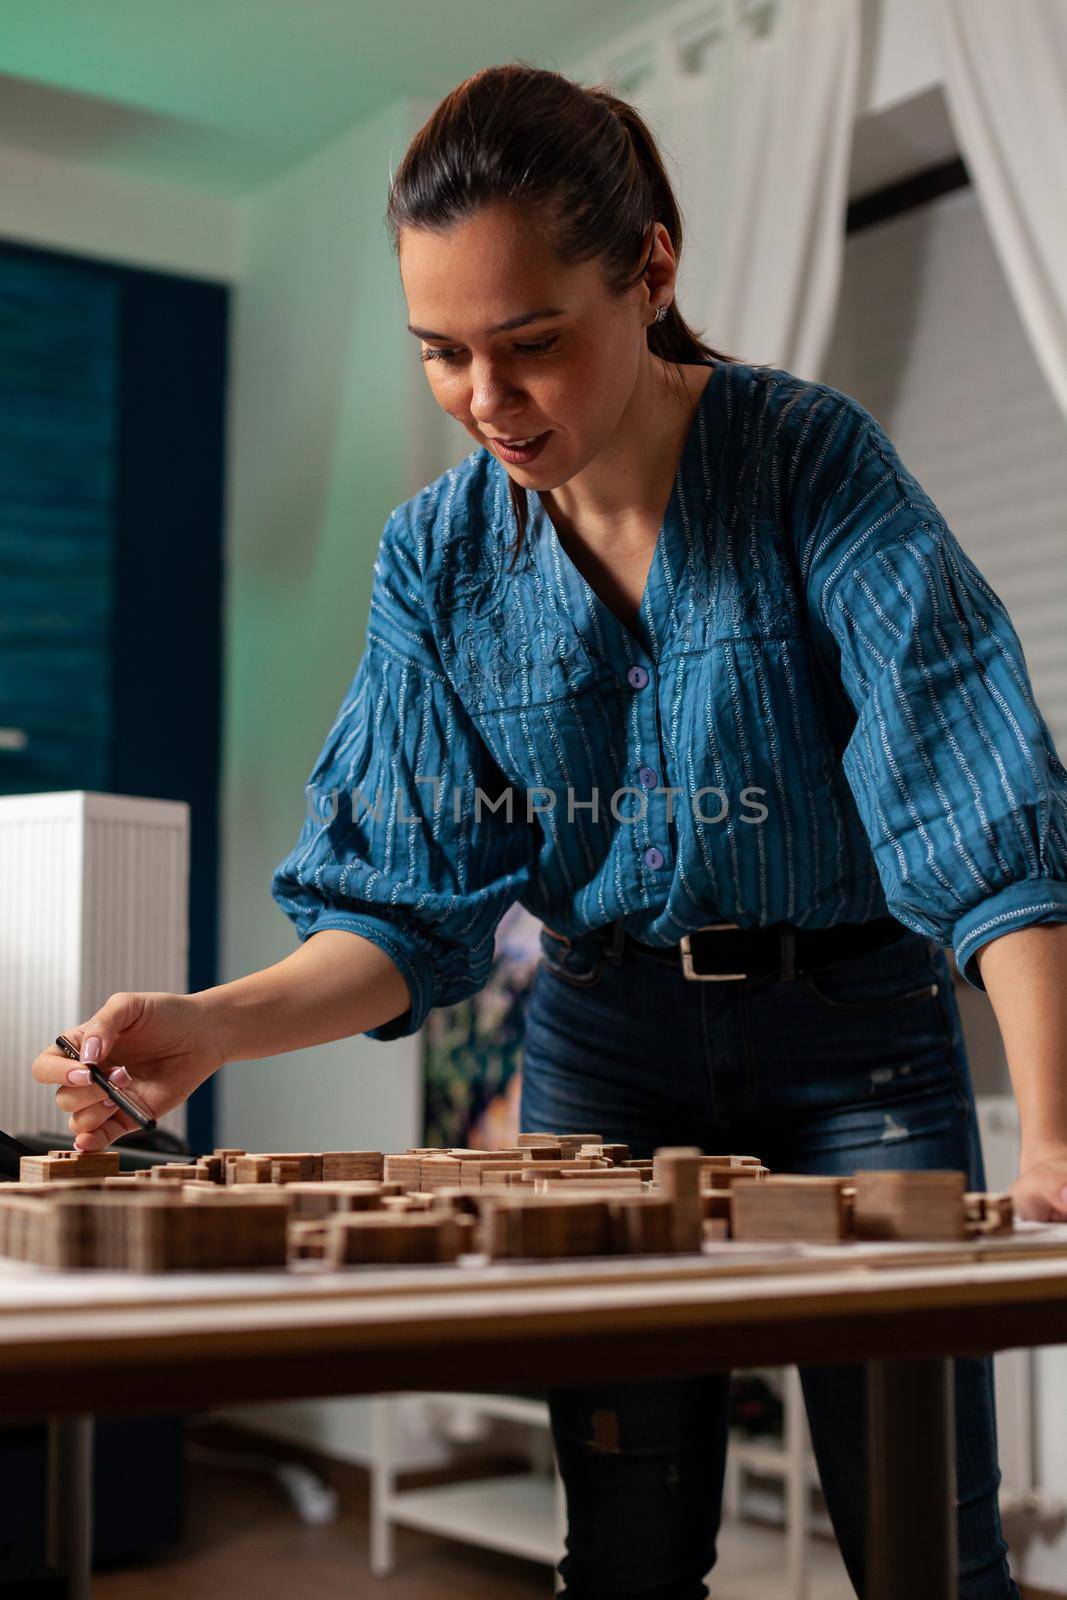 Caucasian worker standing at business desk office doing architectural design project for futuristic development construction. Professional woman working on maquette for renovation concept